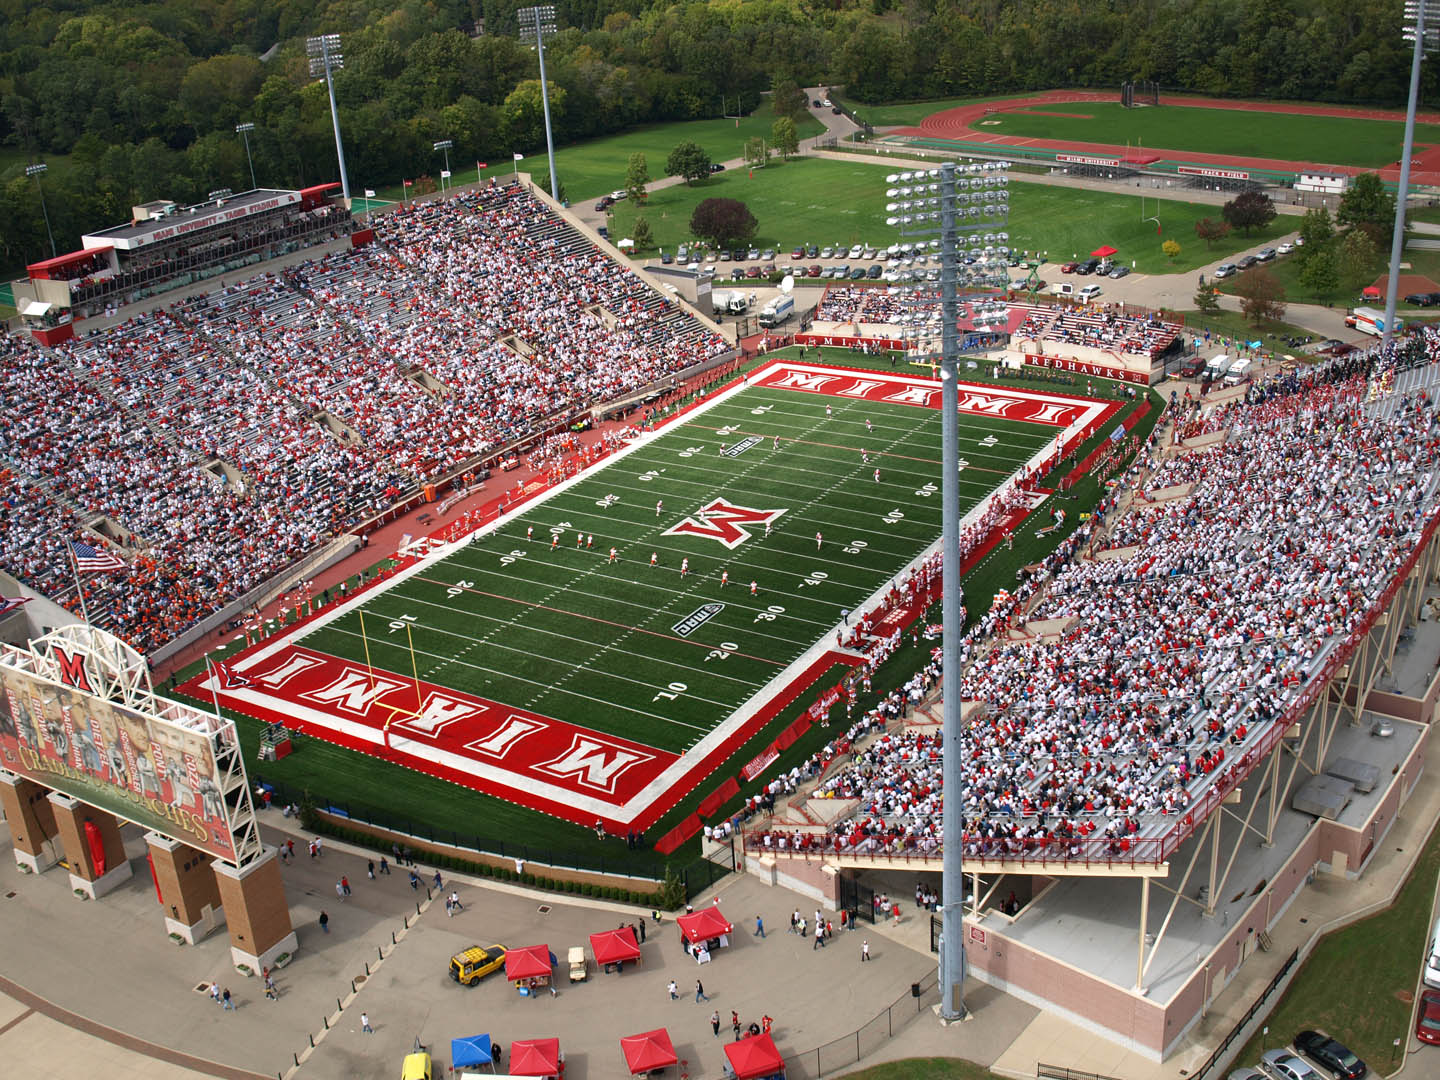 Fred Yager Stadium, home of the Miami-OH Redhawks